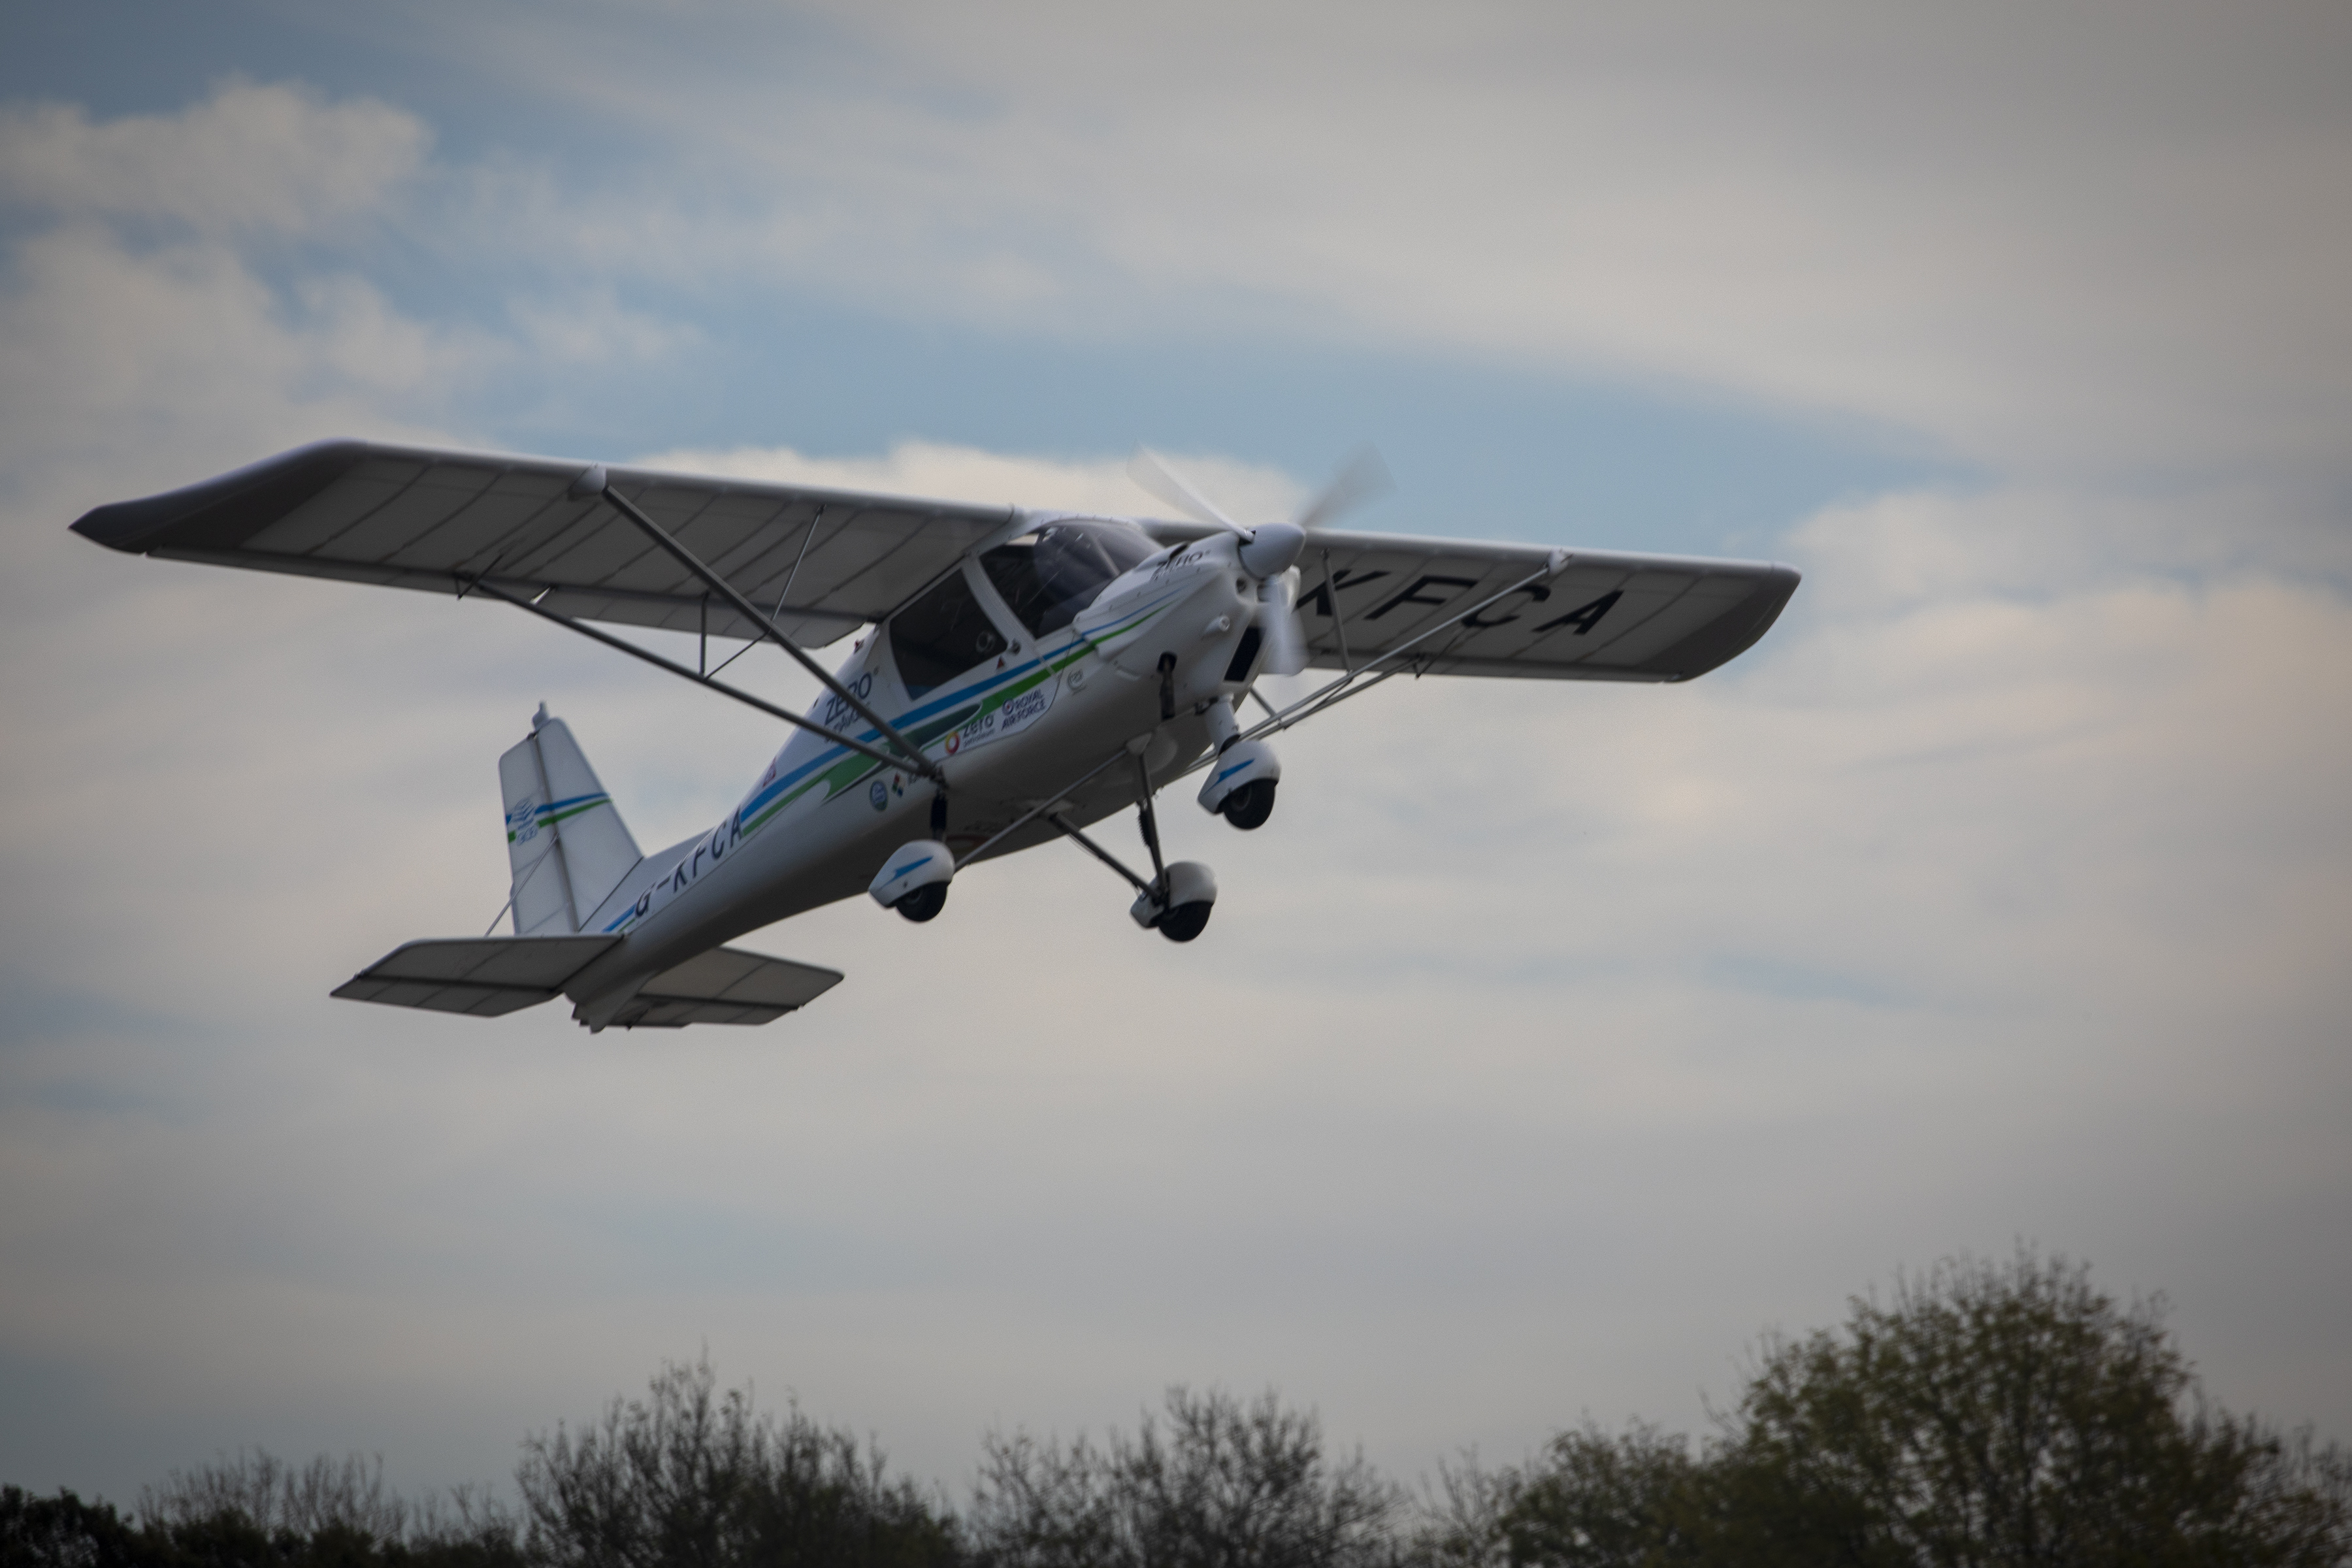 Image shows Ikarus microlight aircraft taking off.